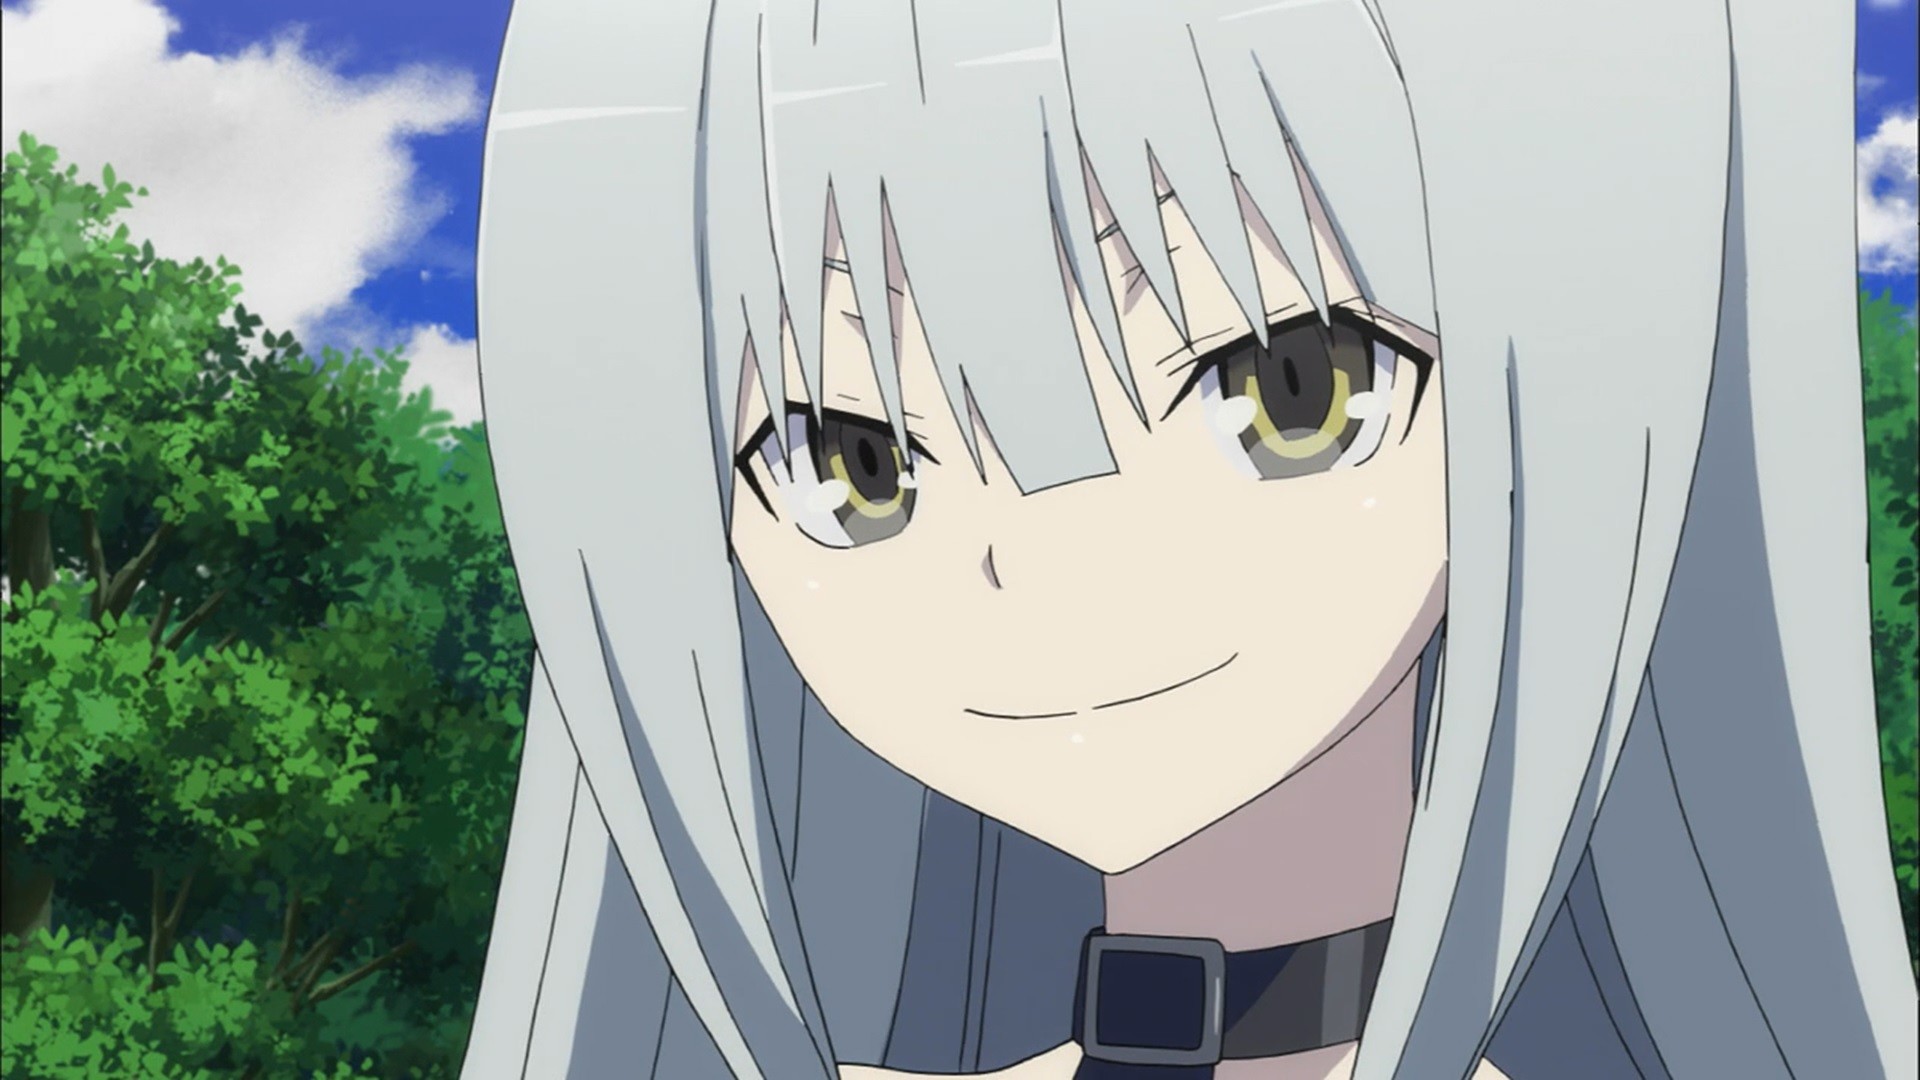 Best girl has finally shown herself in trinity seven name is sora or rat